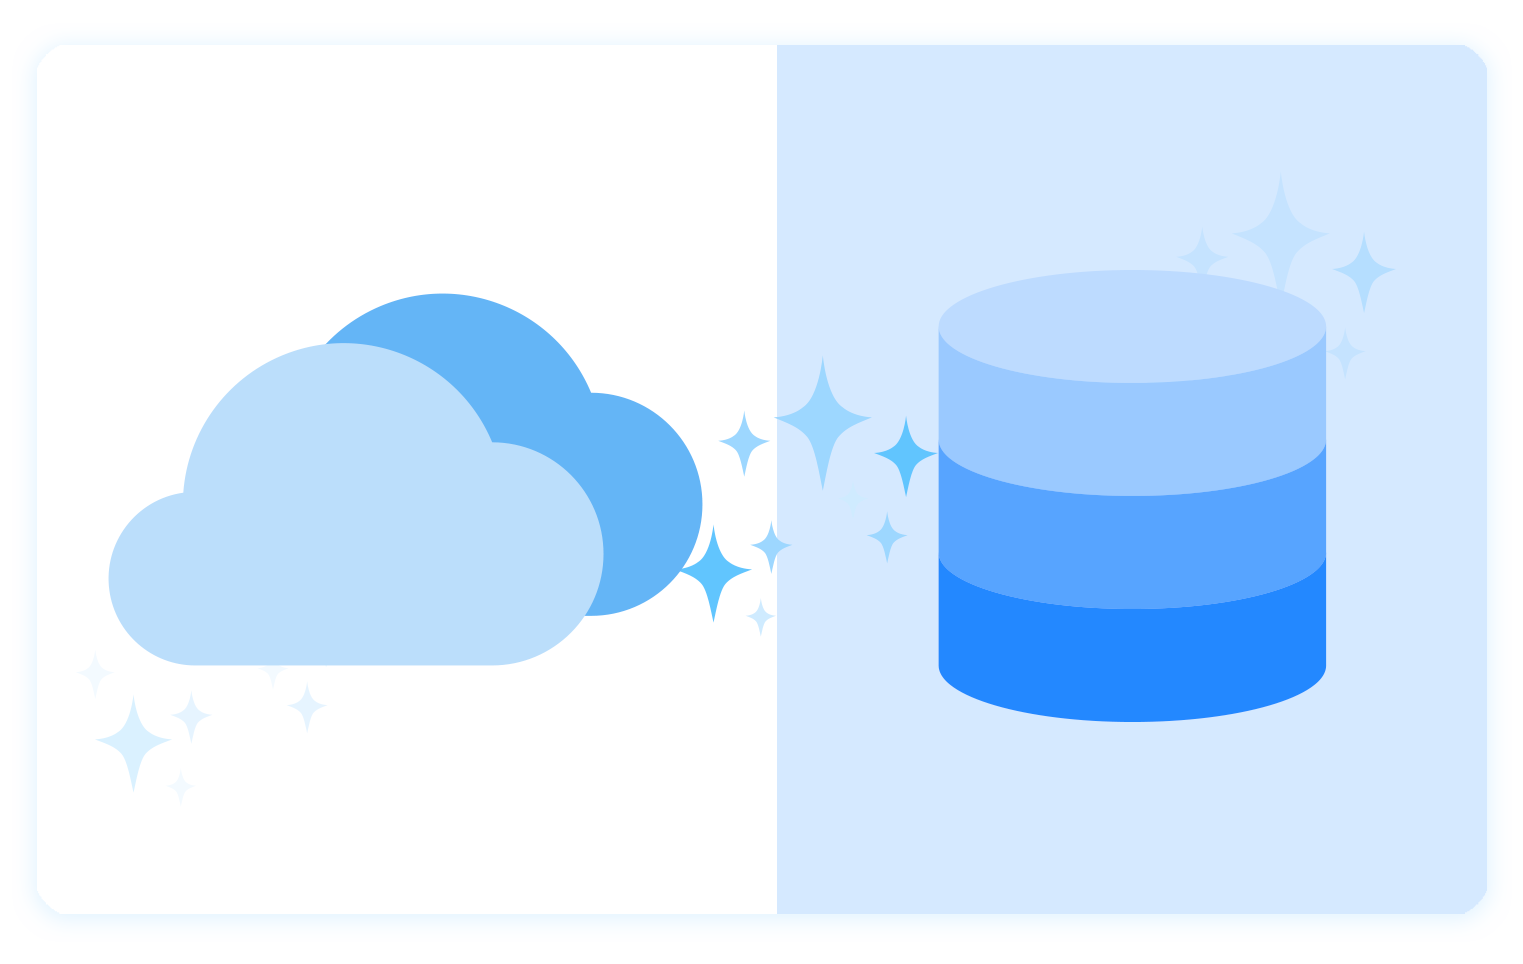 Host your calling data in the cloud or on-premises.